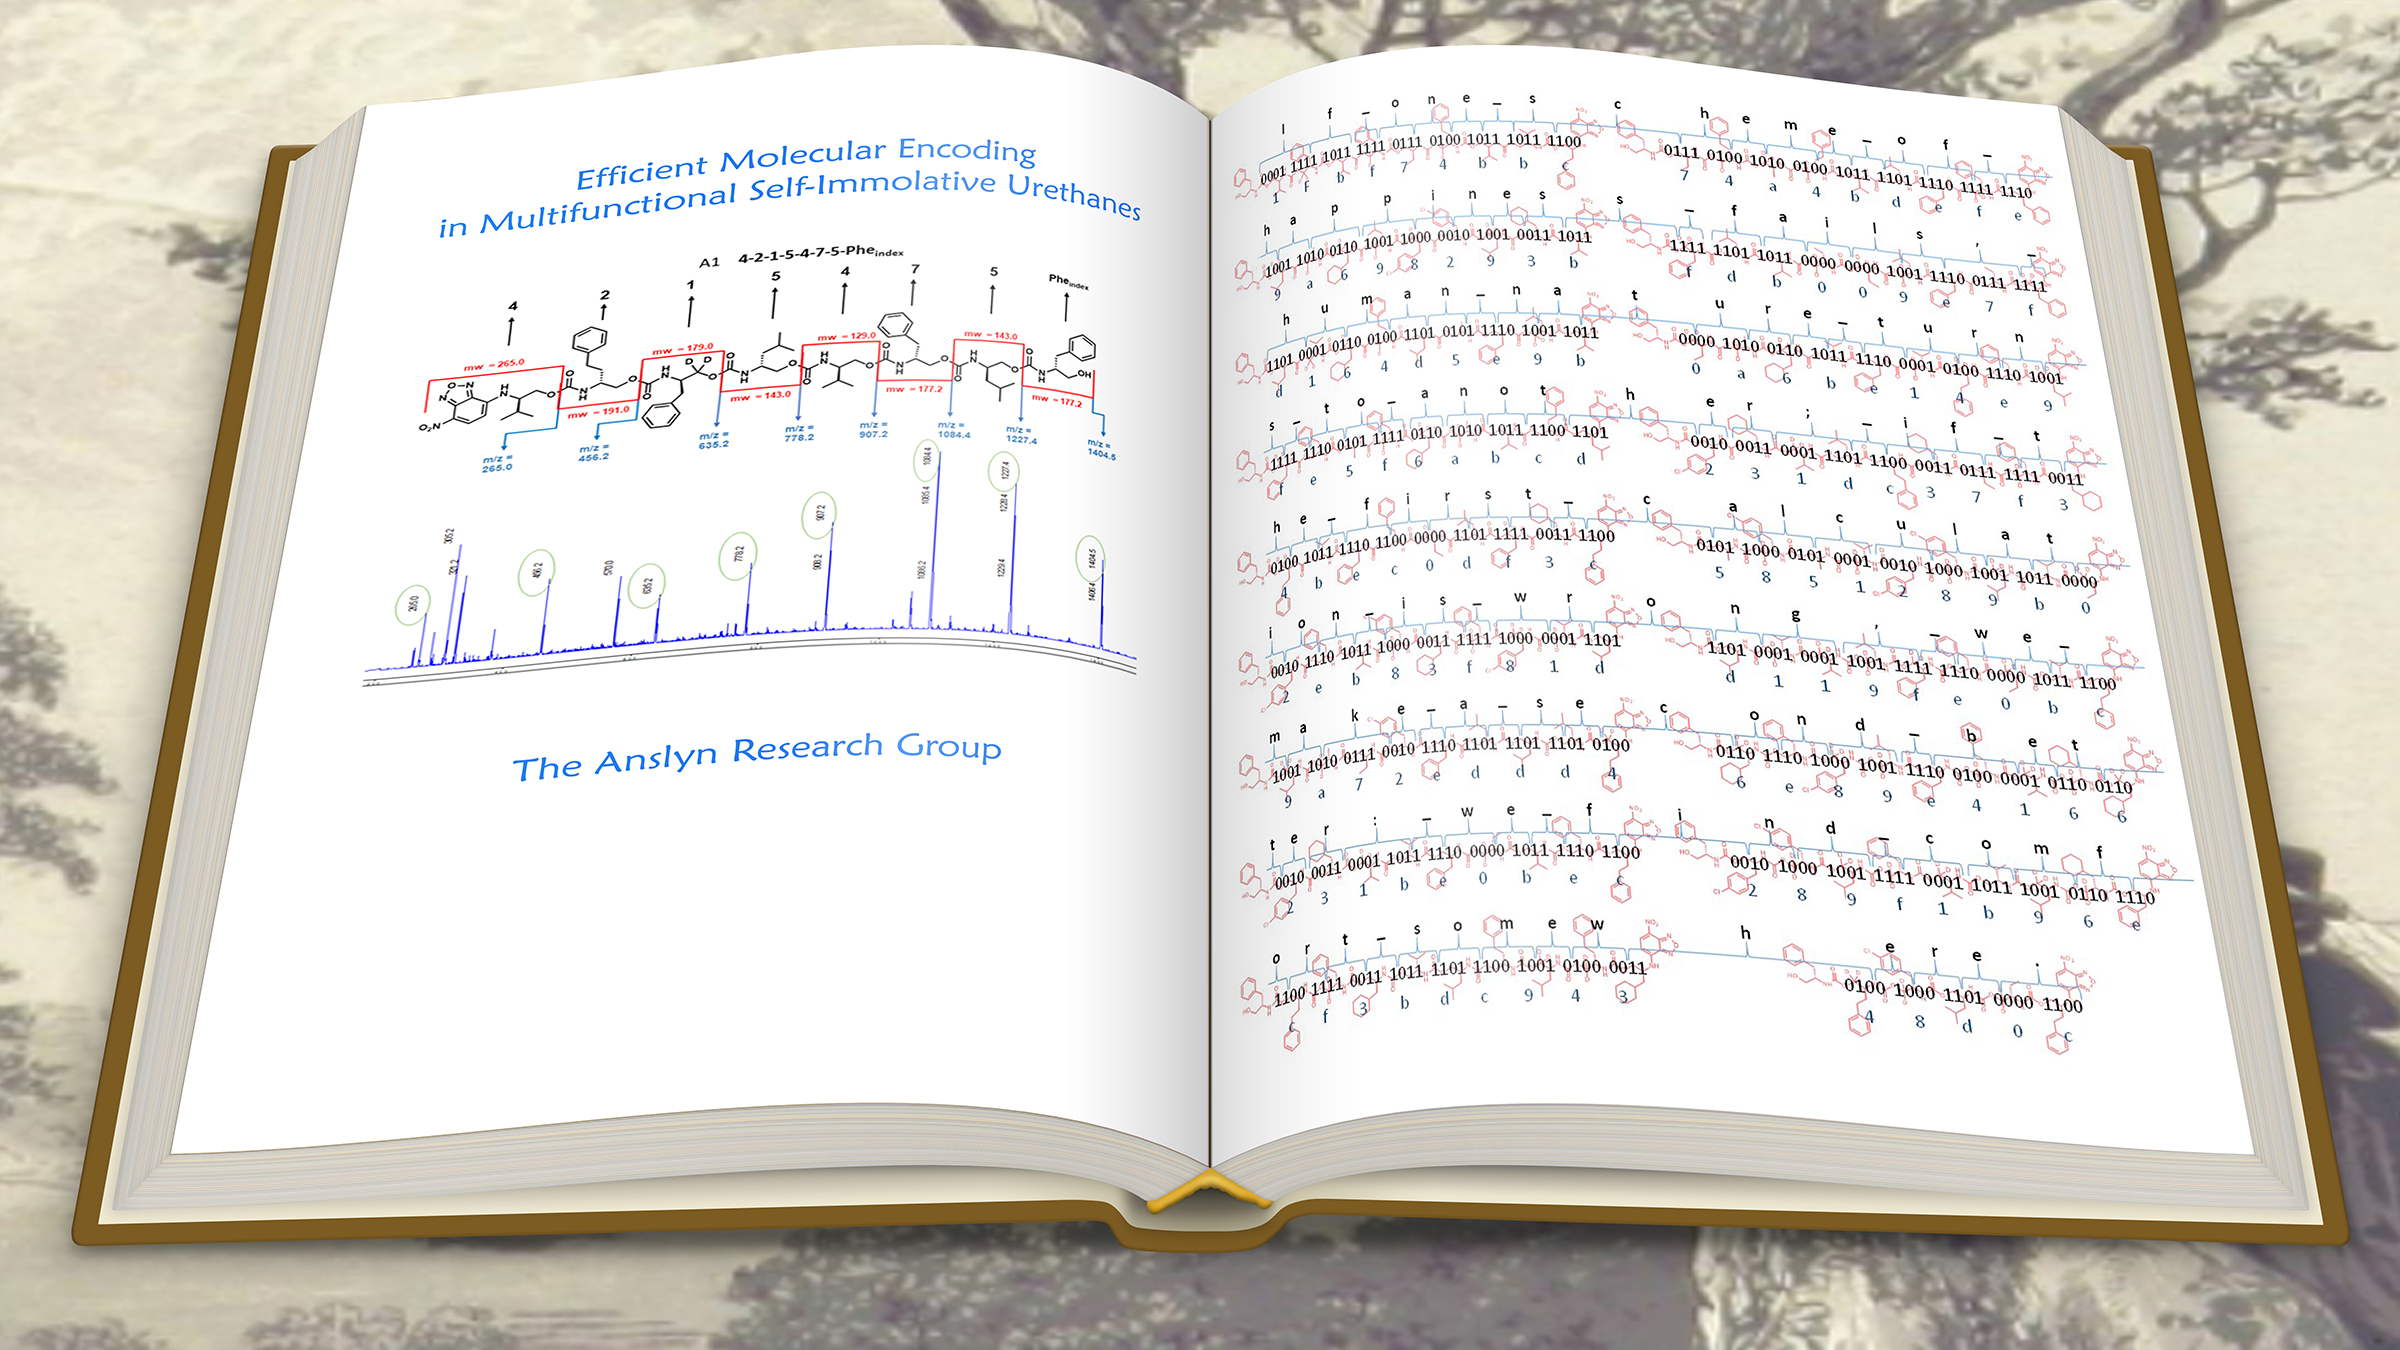 Illustration of a book showing how to translate chemical components of a polymer into English letters